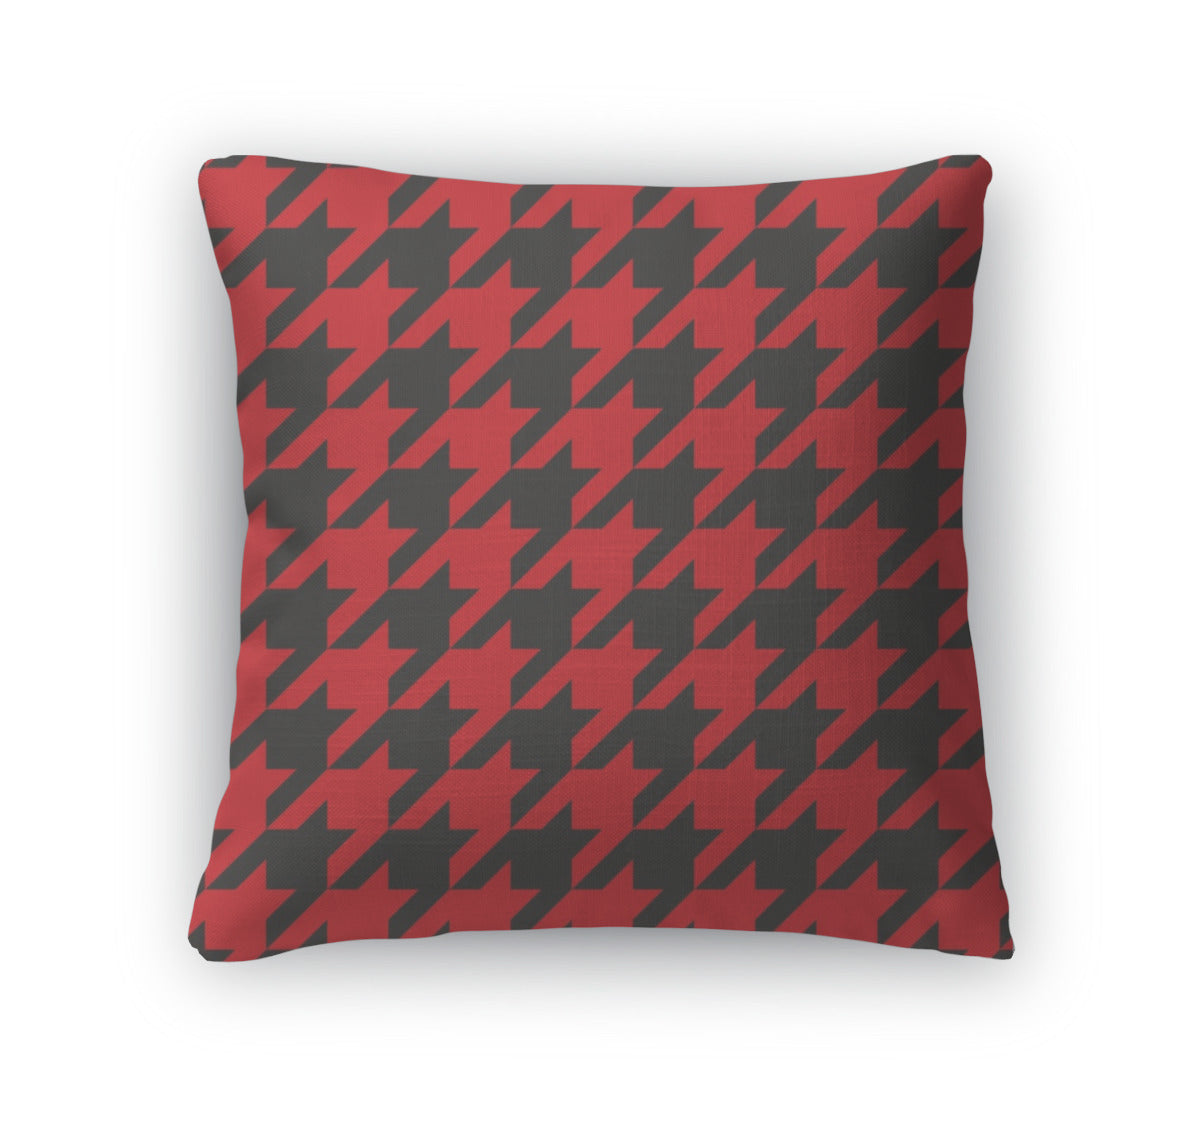 Throw Pillow, Hounds Tooth Red And Black Pattern Or Traditional Scottish Plaid Fabric For